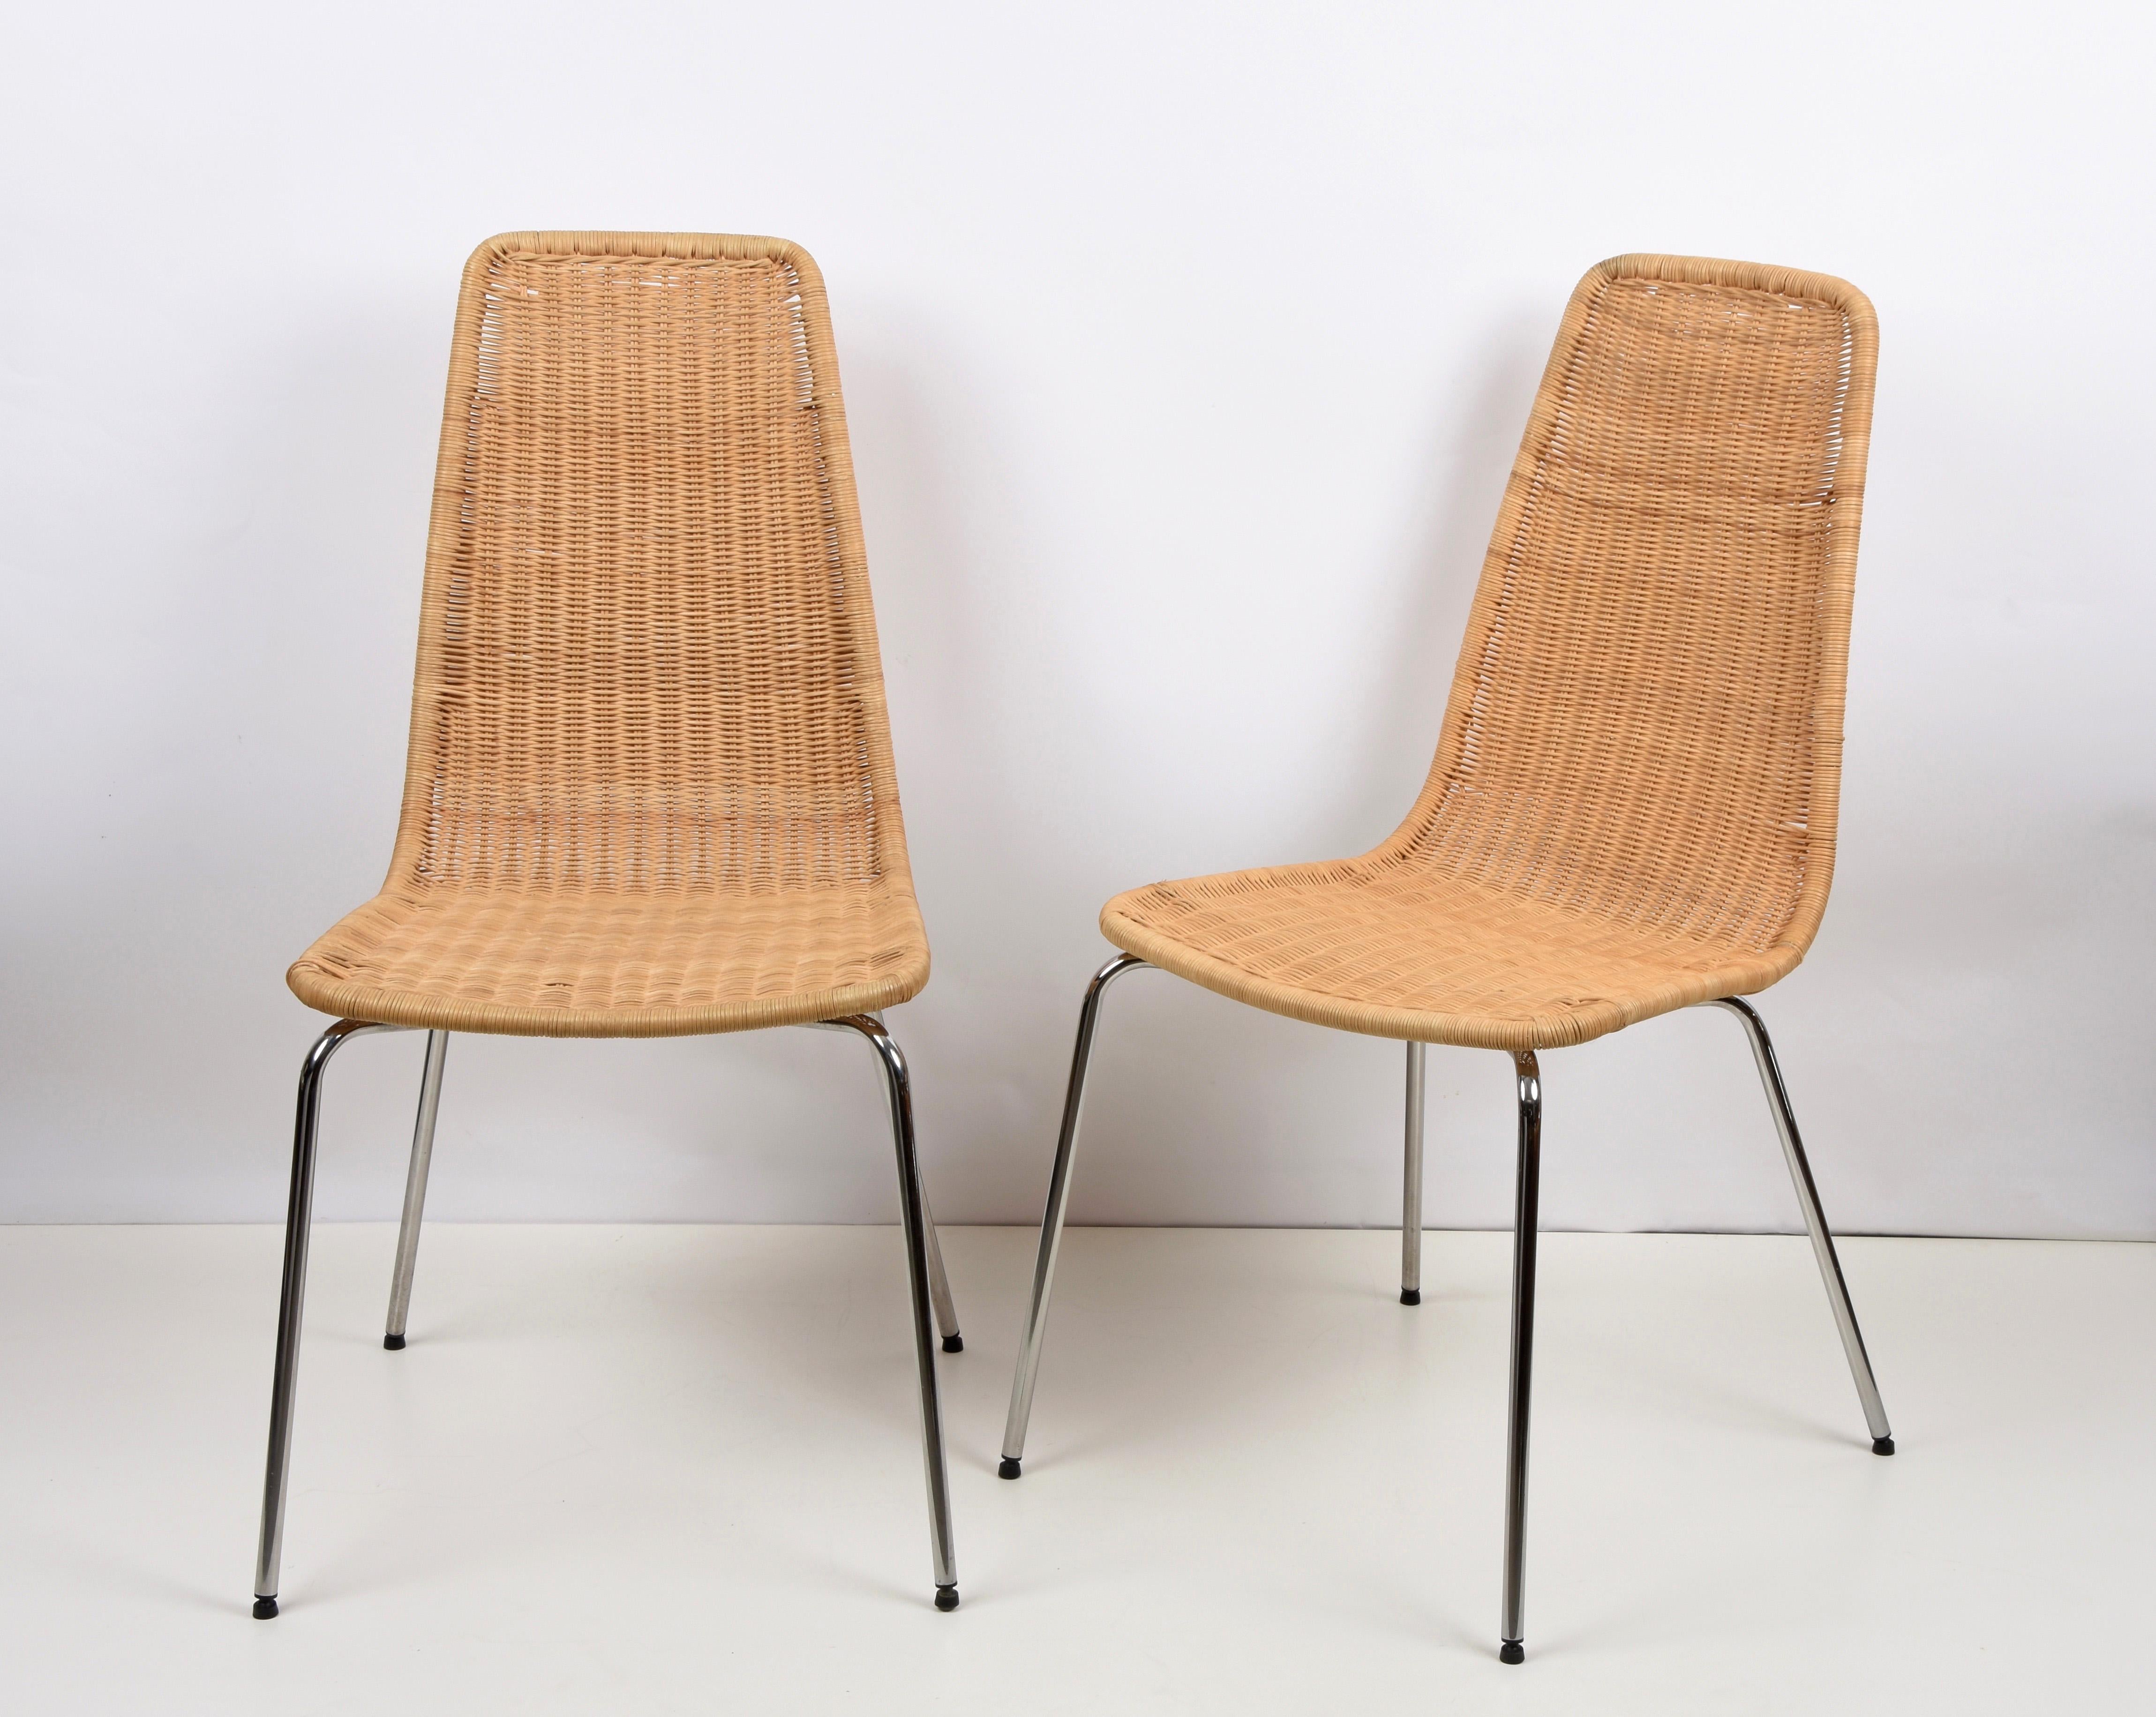 Late 20th Century Midcentury Chromed Metal with Removable Rattan and Wicker Italian Chairs, 1970s For Sale